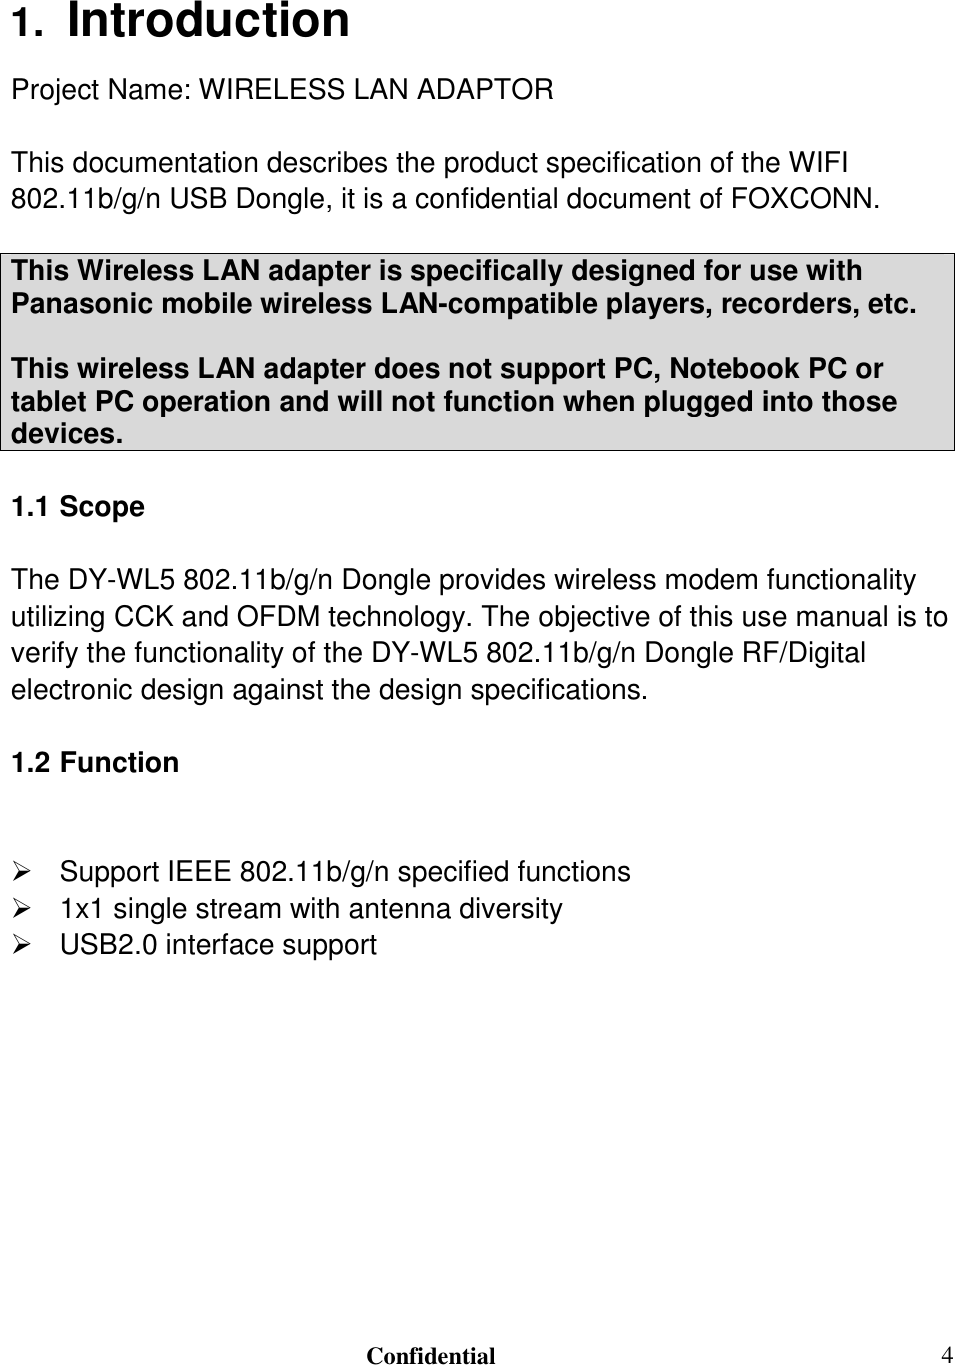                                                                               Confidential  41.  Introduction Project Name: WIRELESS LAN ADAPTOR  This documentation describes the product specification of the WIFI 802.11b/g/n USB Dongle, it is a confidential document of FOXCONN.  This Wireless LAN adapter is specifically designed for use with Panasonic mobile wireless LAN-compatible players, recorders, etc.  This wireless LAN adapter does not support PC, Notebook PC or tablet PC operation and will not function when plugged into those devices.  1.1 Scope  The DY-WL5 802.11b/g/n Dongle provides wireless modem functionality utilizing CCK and OFDM technology. The objective of this use manual is to verify the functionality of the DY-WL5 802.11b/g/n Dongle RF/Digital electronic design against the design specifications.   1.2 Function    Support IEEE 802.11b/g/n specified functions   1x1 single stream with antenna diversity   USB2.0 interface support  